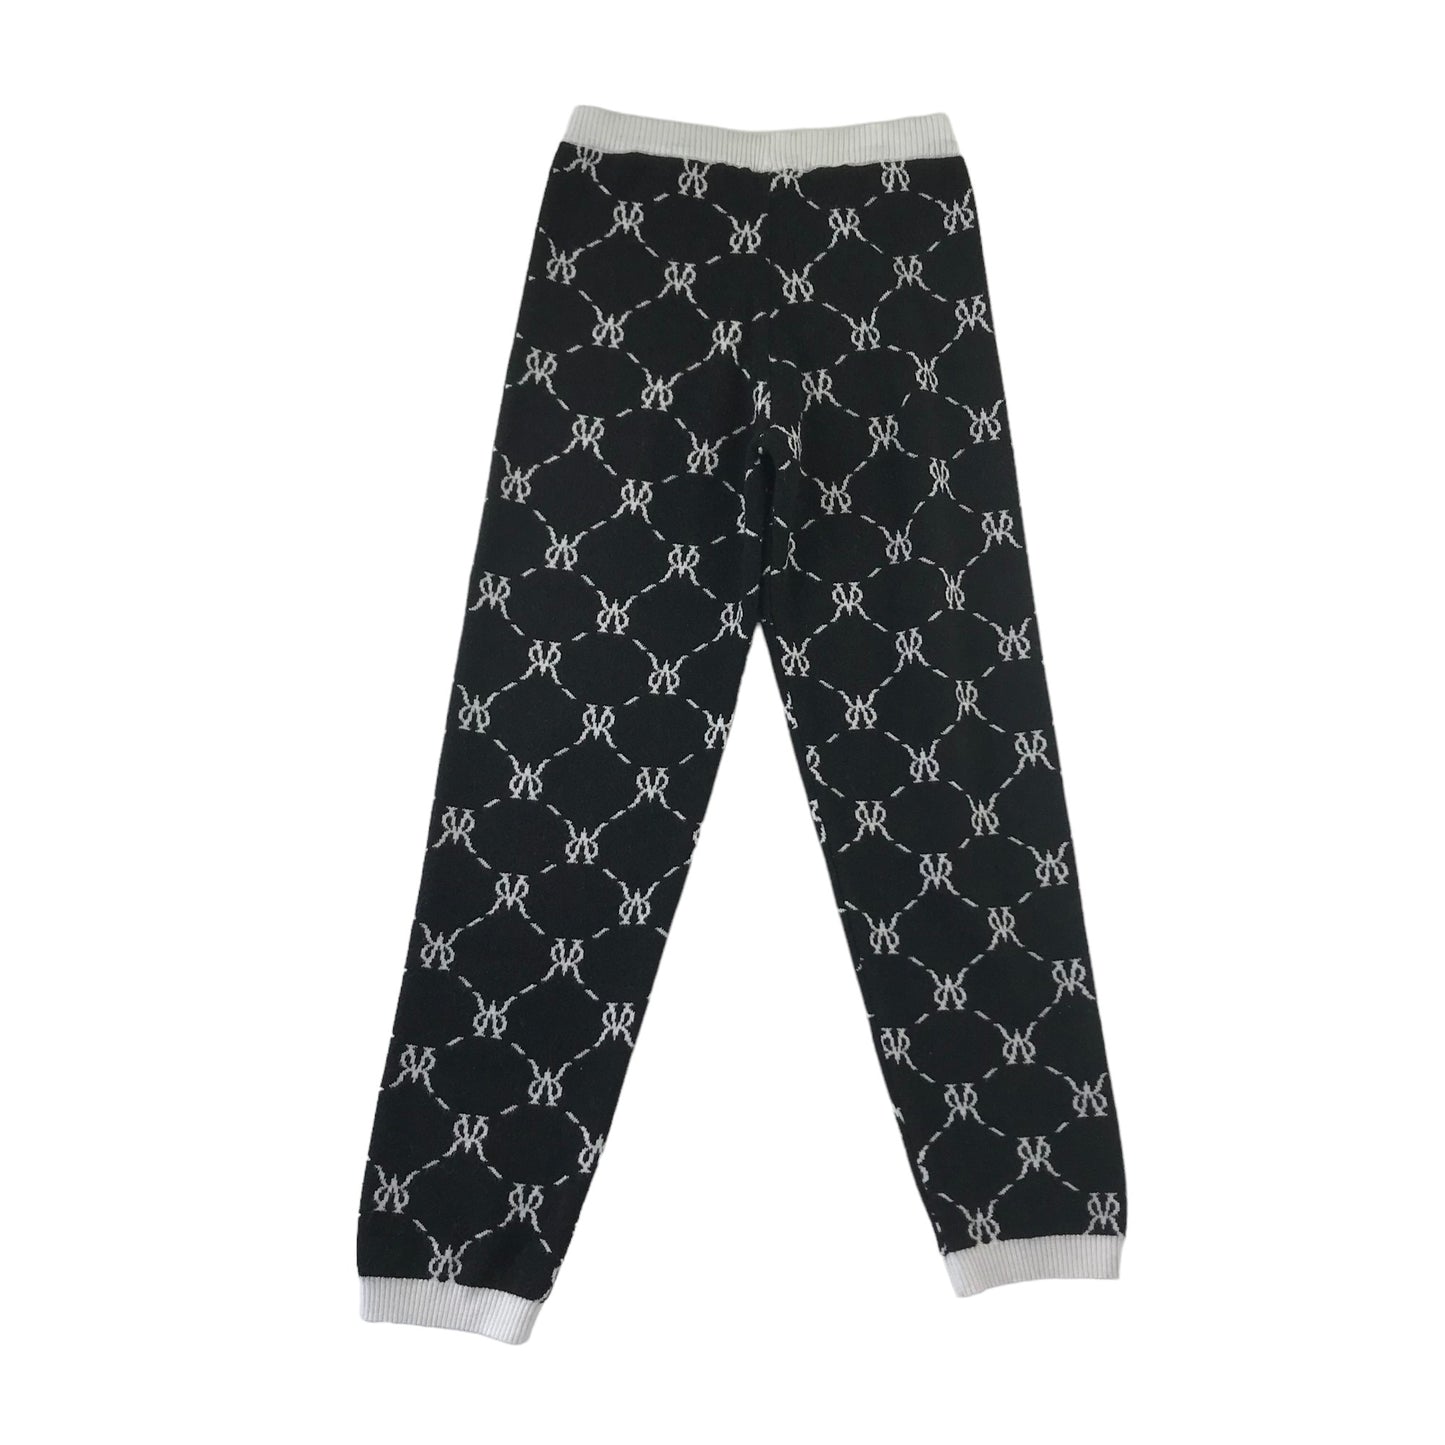 River Island Jumper and Joggers Set Age 11 Black and White Print Pattern